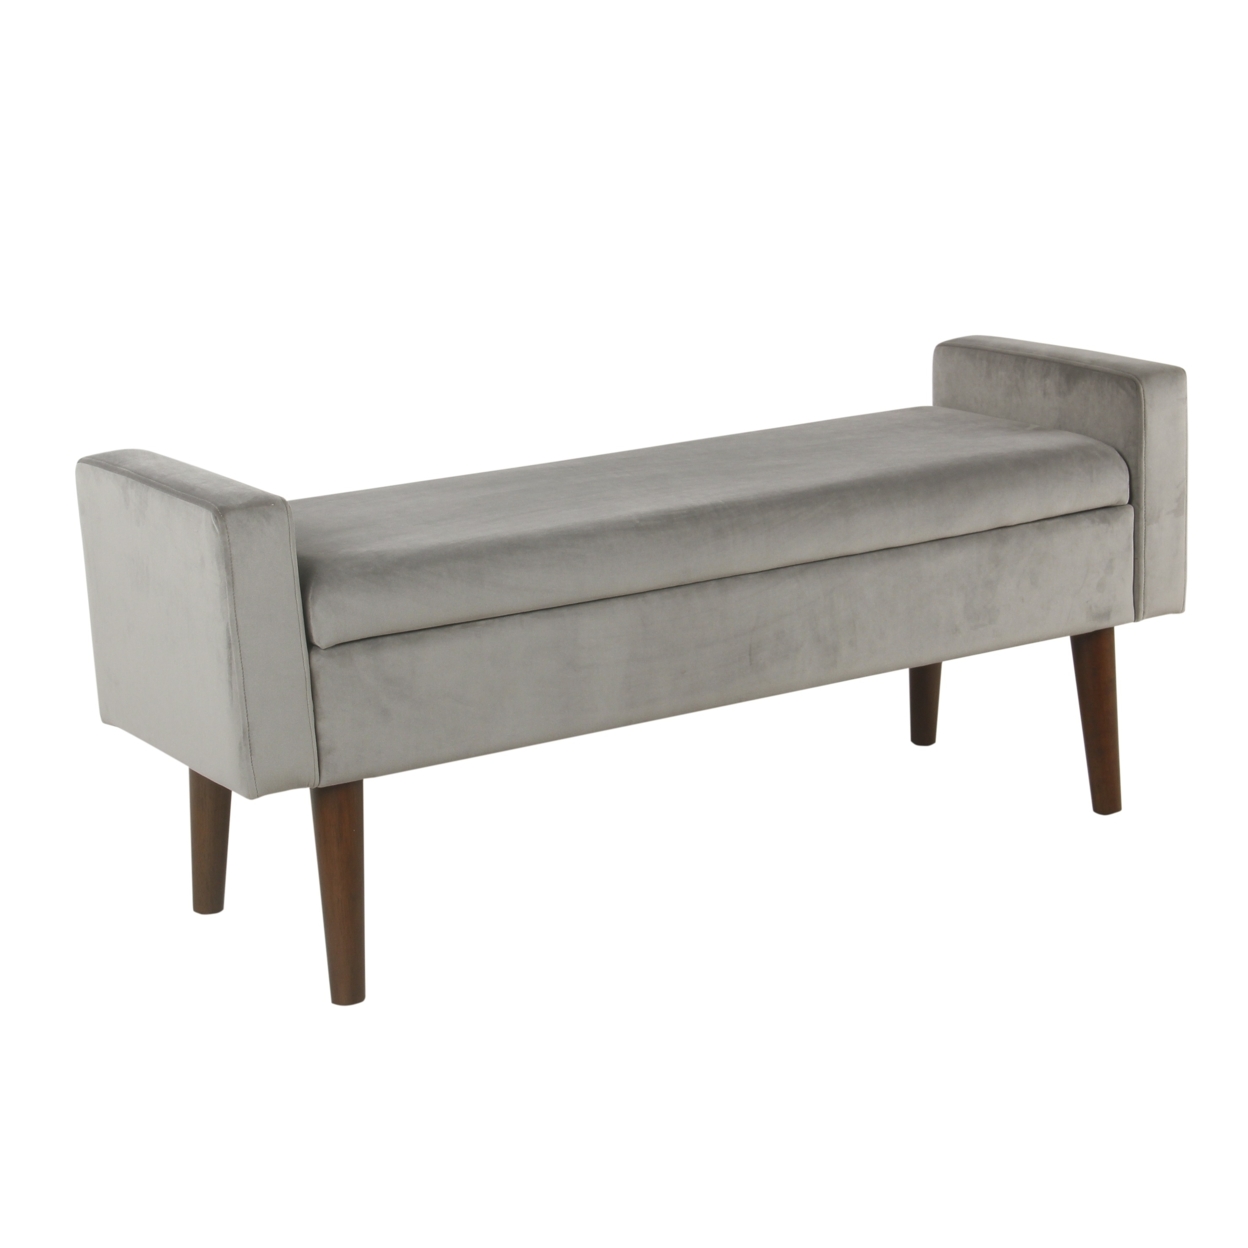 Velvet Upholstered Wooden Bench with Lift Top Storage and Tapered Feet, Gray